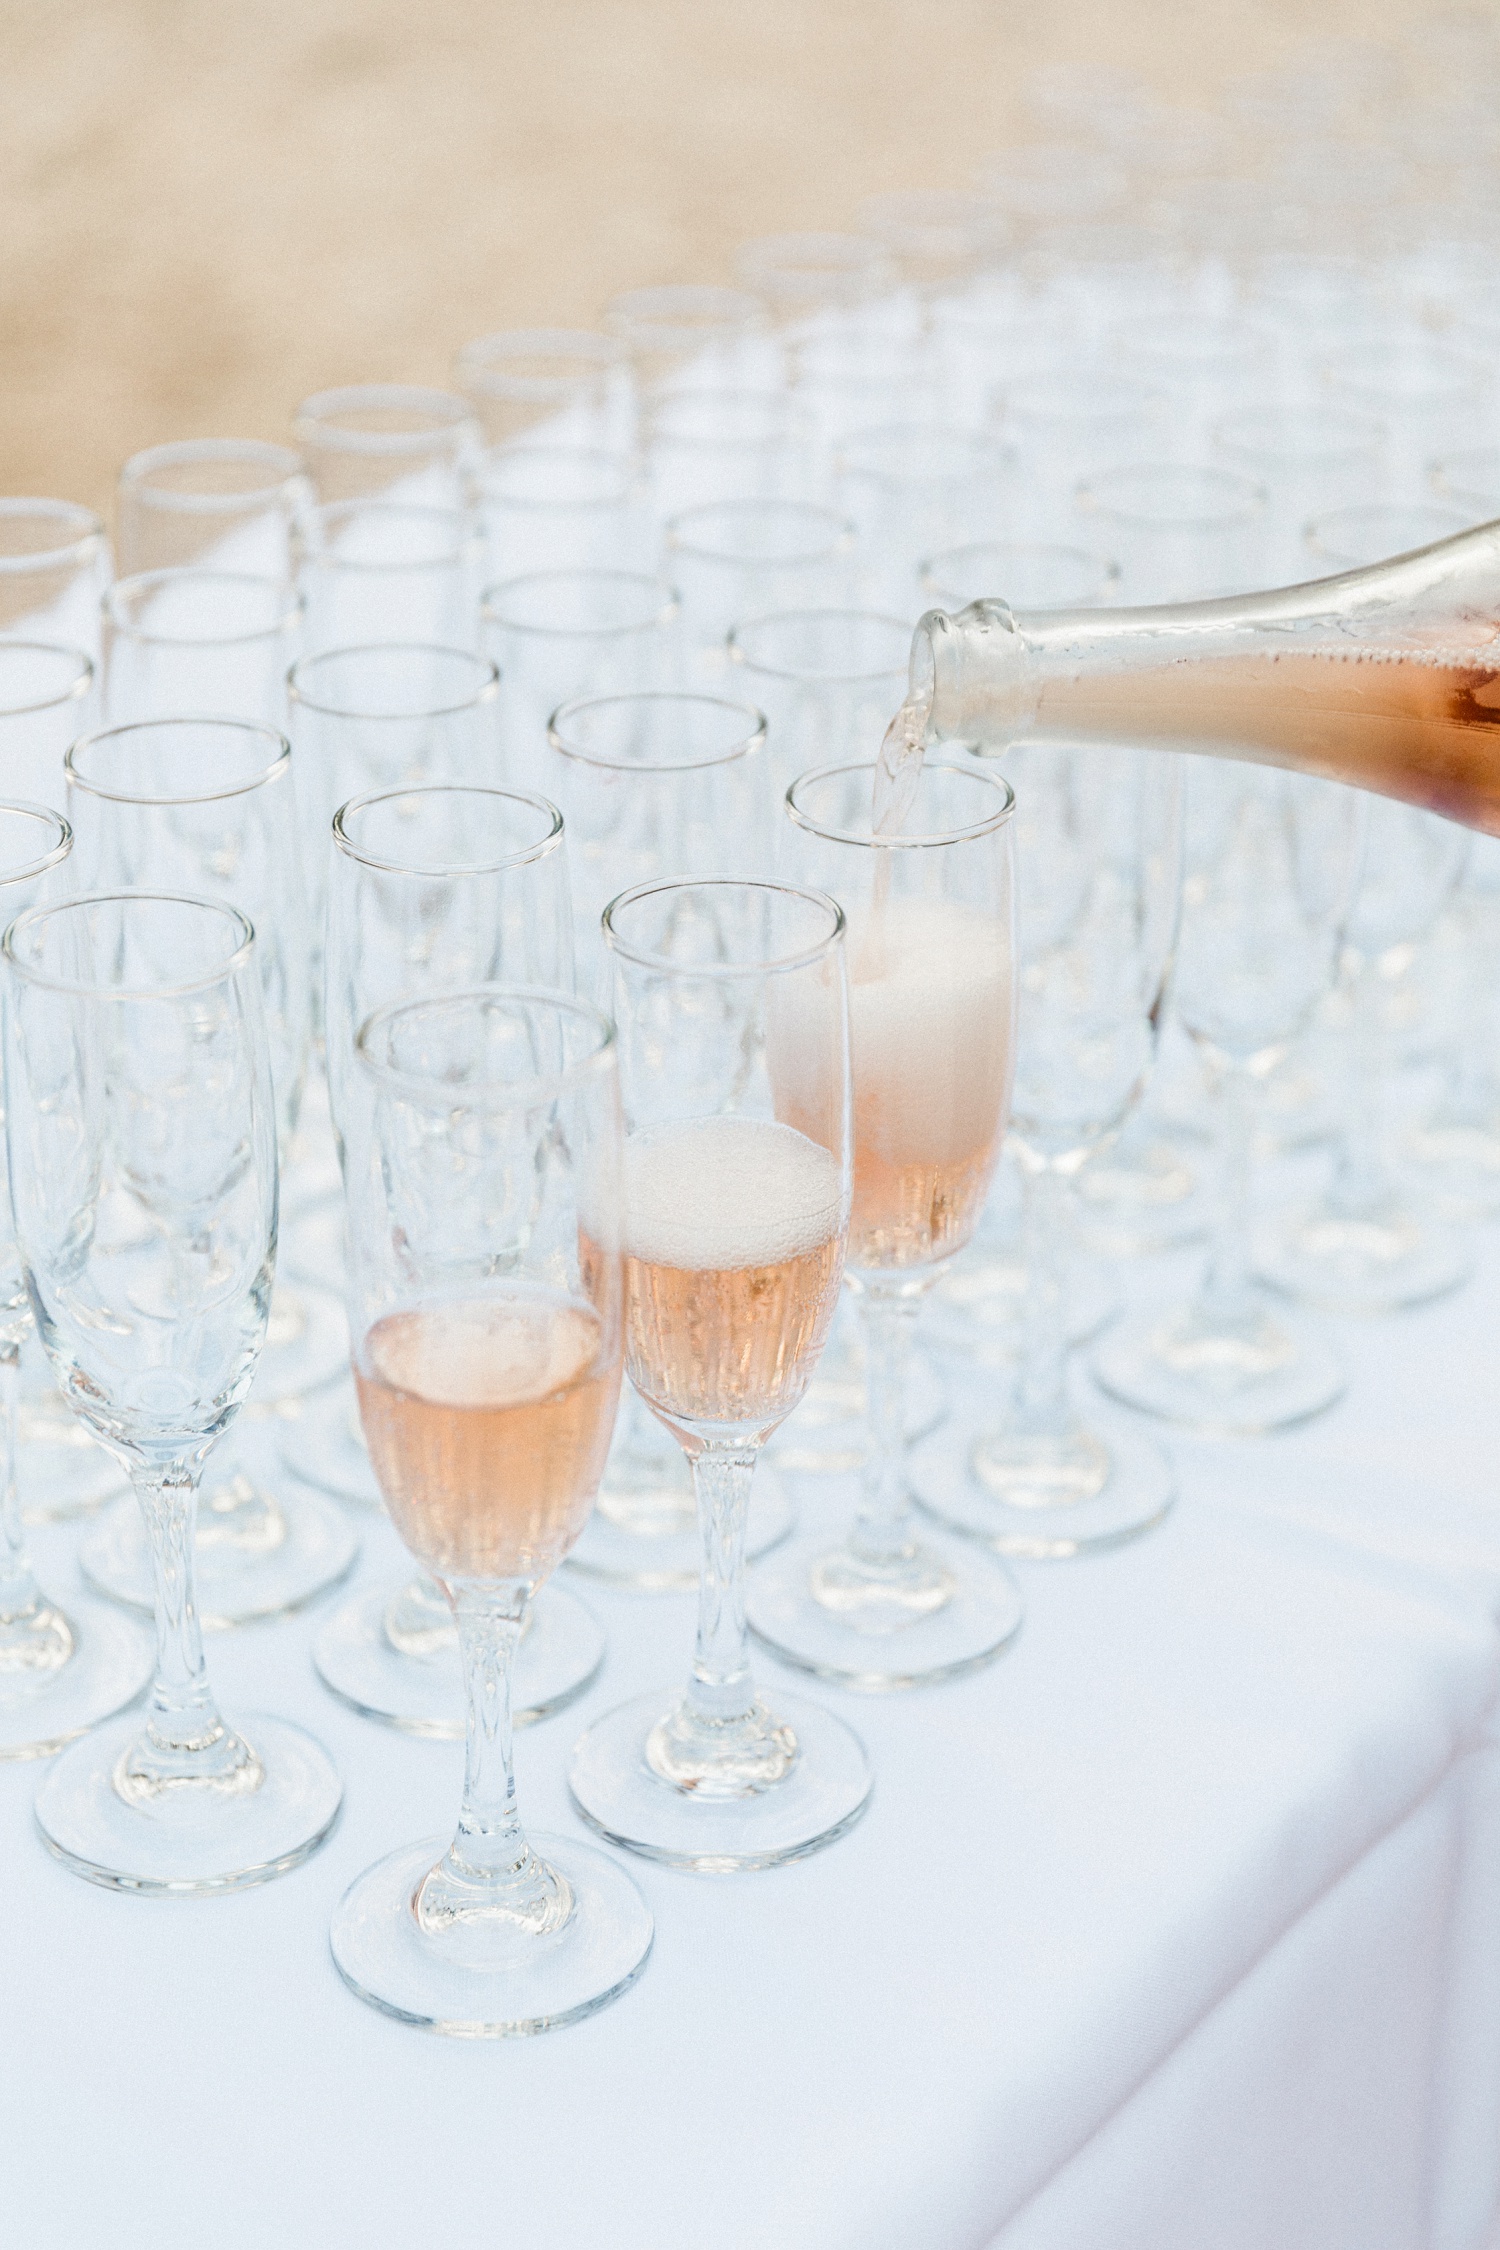 Rose champagne being poured during cocktail hour at an olive grove wedding on Ithaca